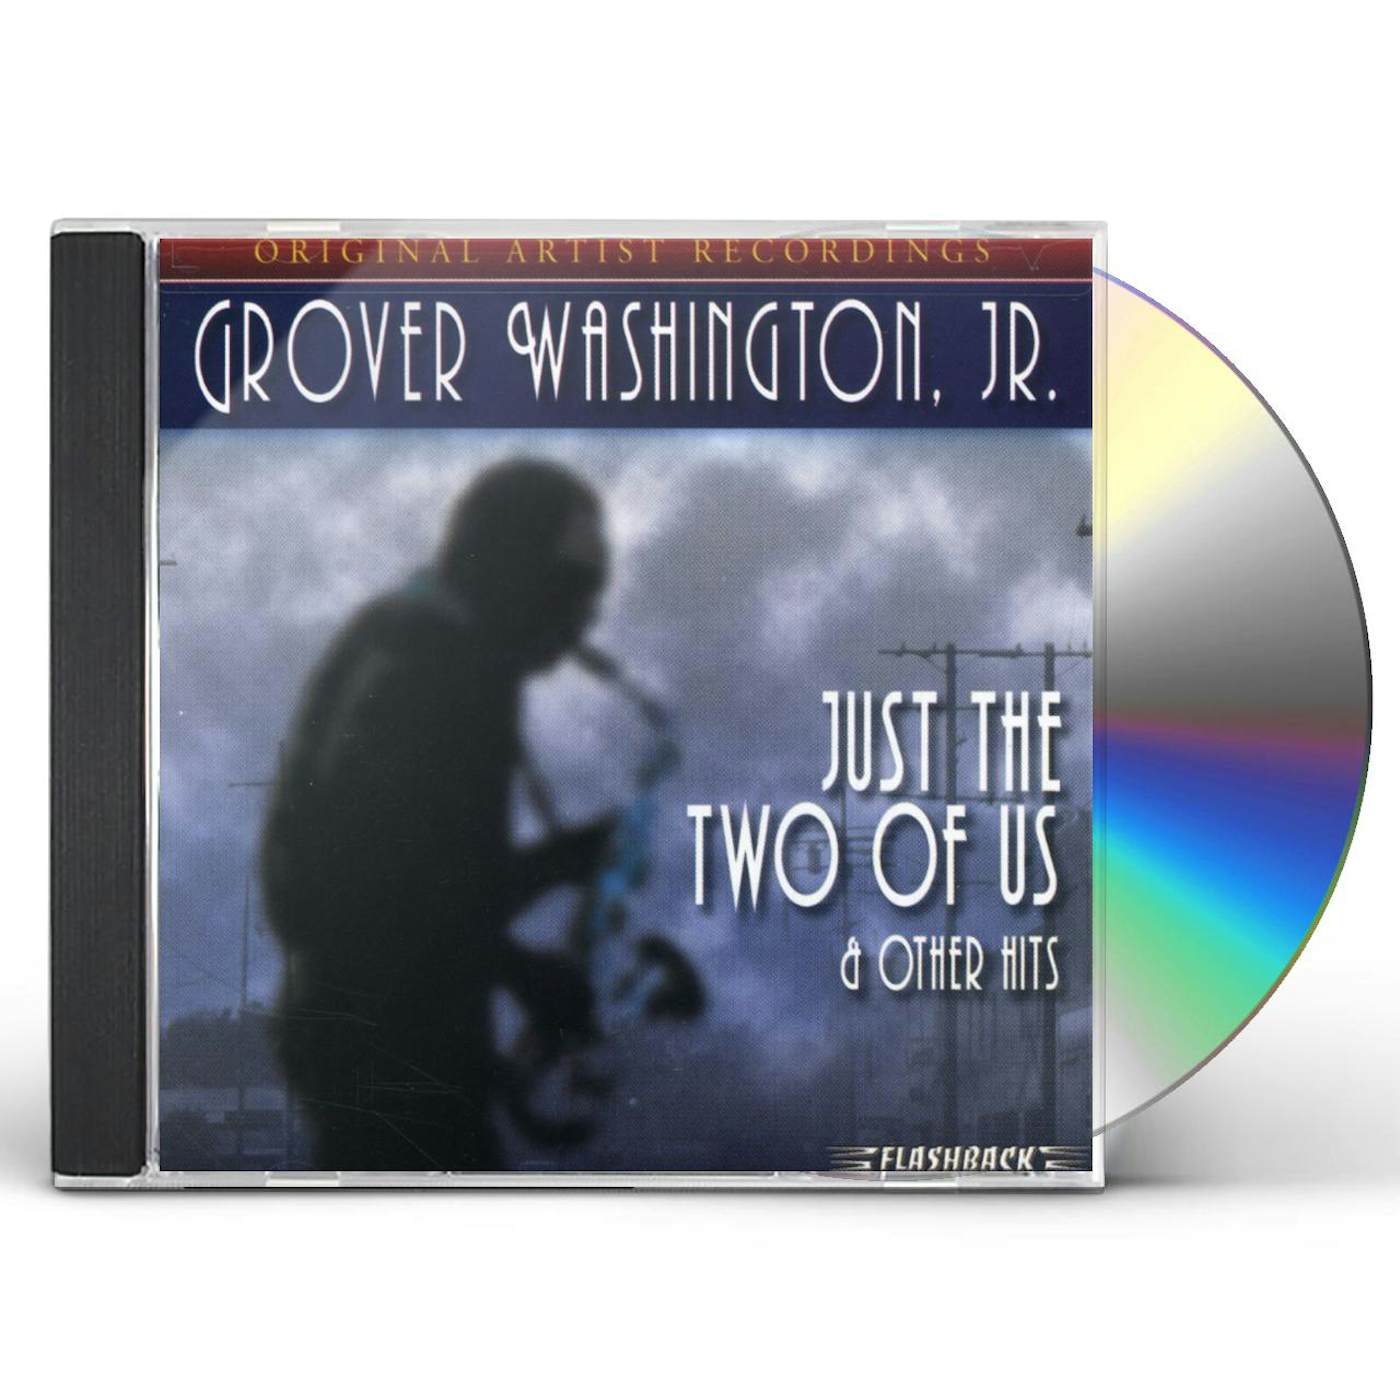 Grover Washington, Jr. JUST THE TWO OF US & OTHER HITS CD